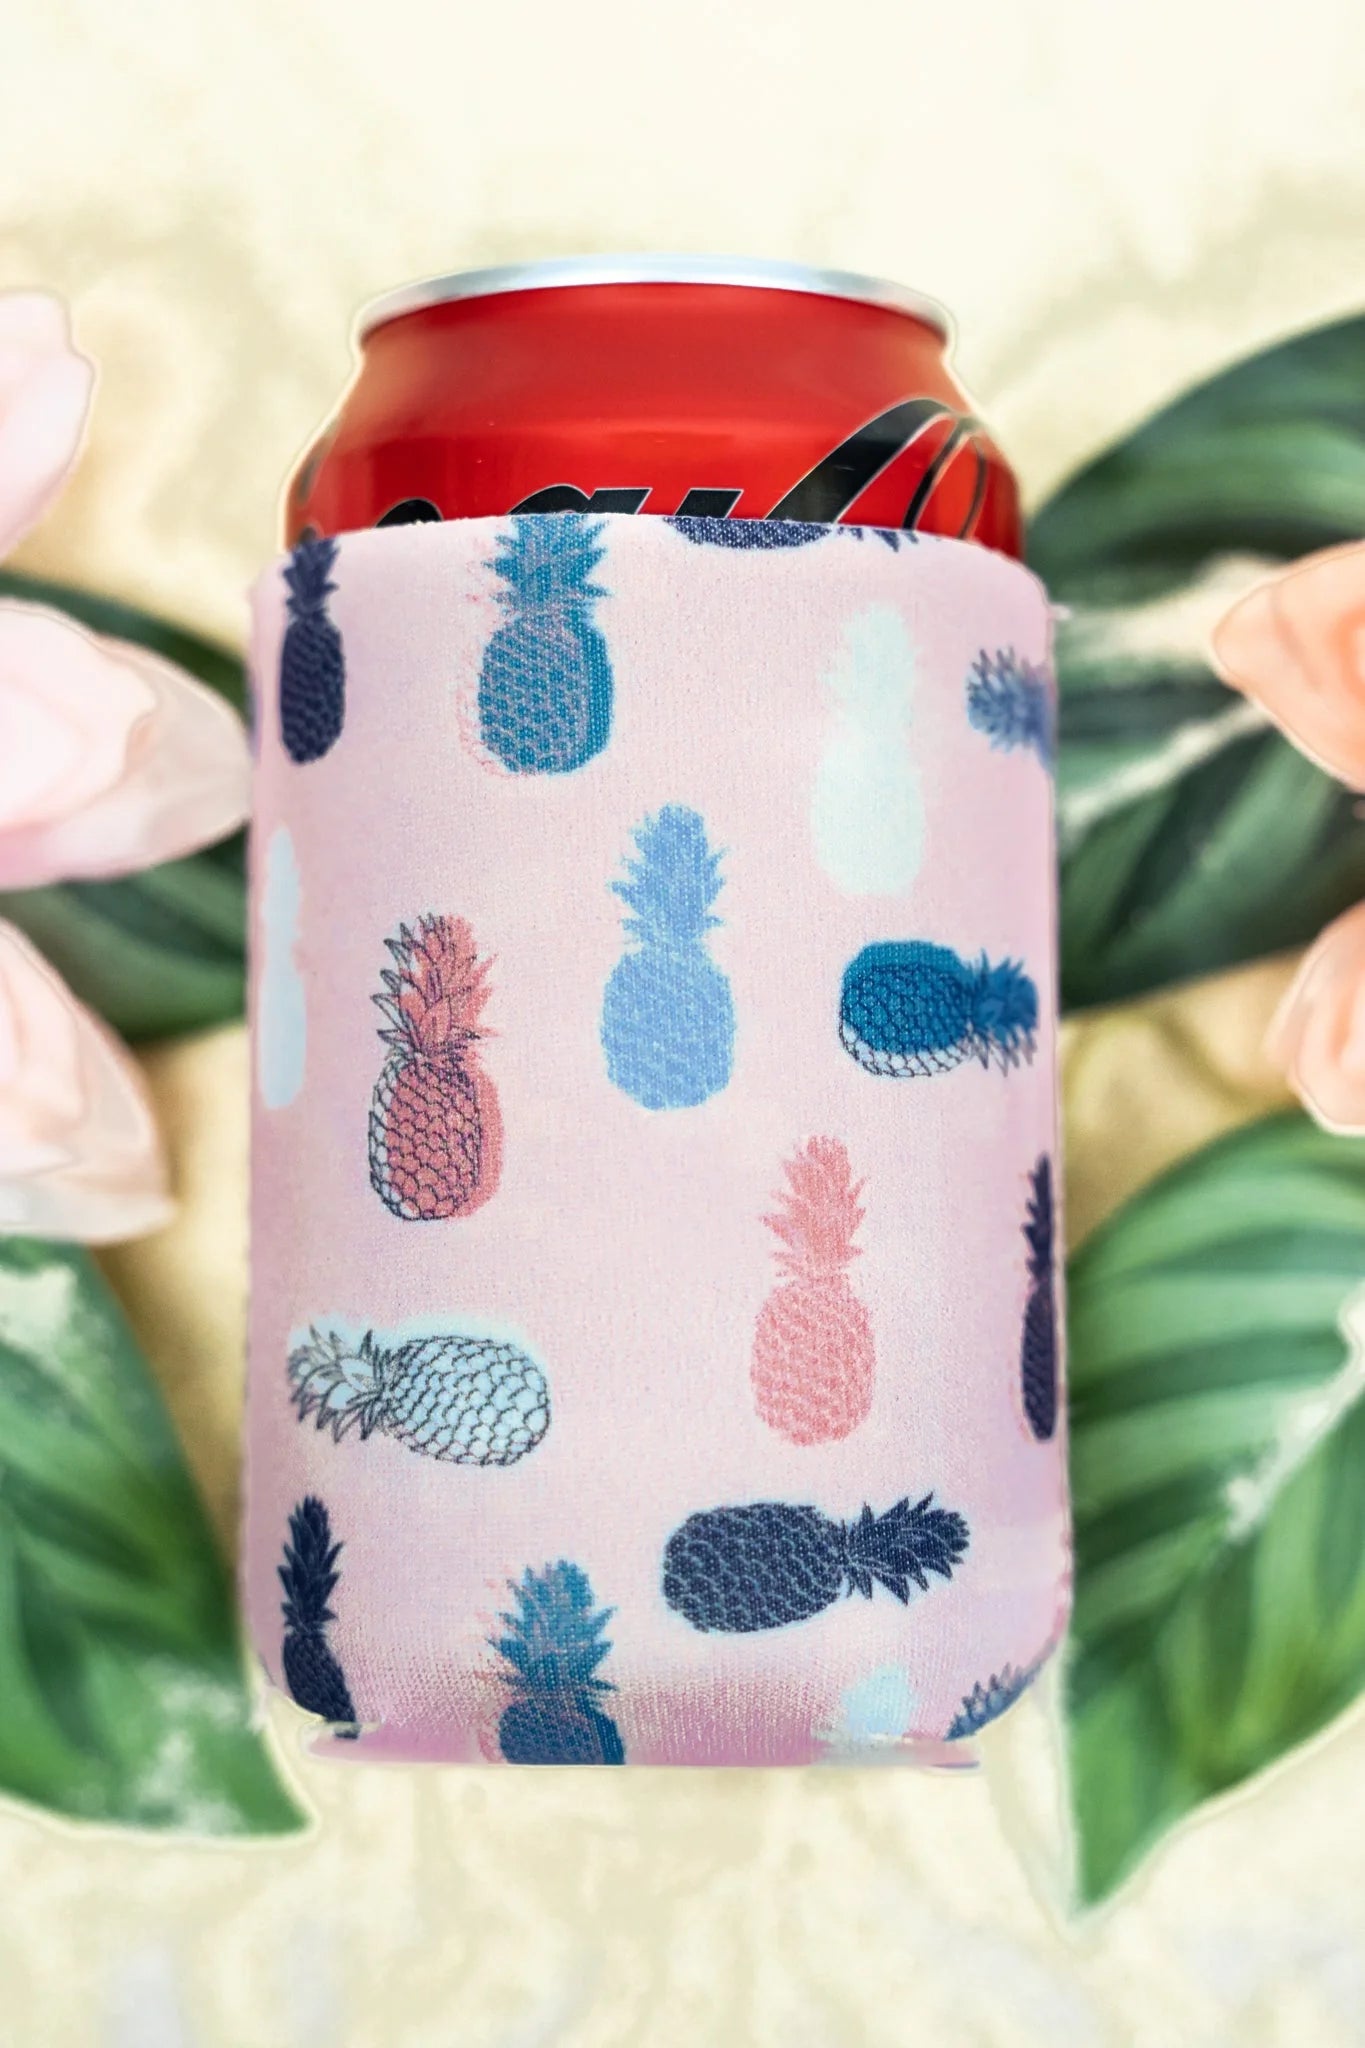 South Beach Miami Pineapple Short Can Beer Koozie Blue and Pink